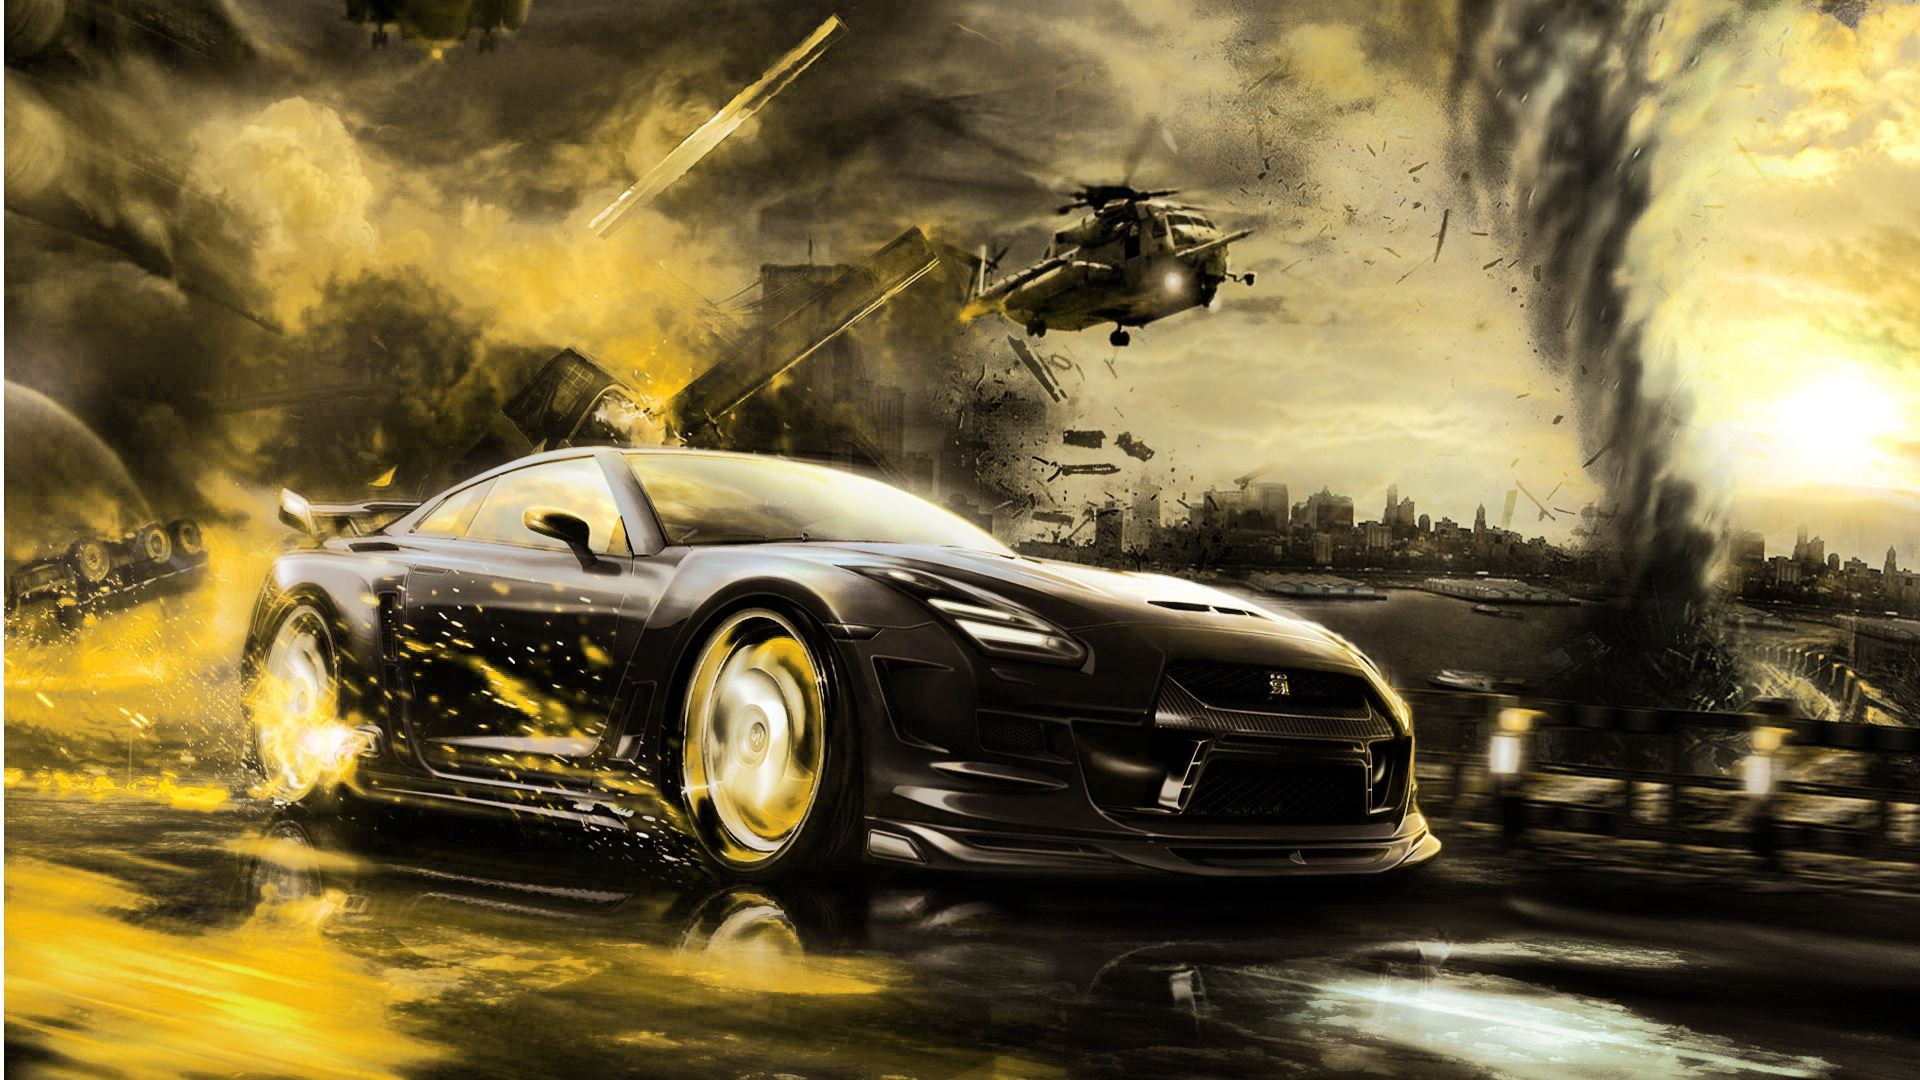 HD Car Background, Wallpaper, Image, Picture. Design